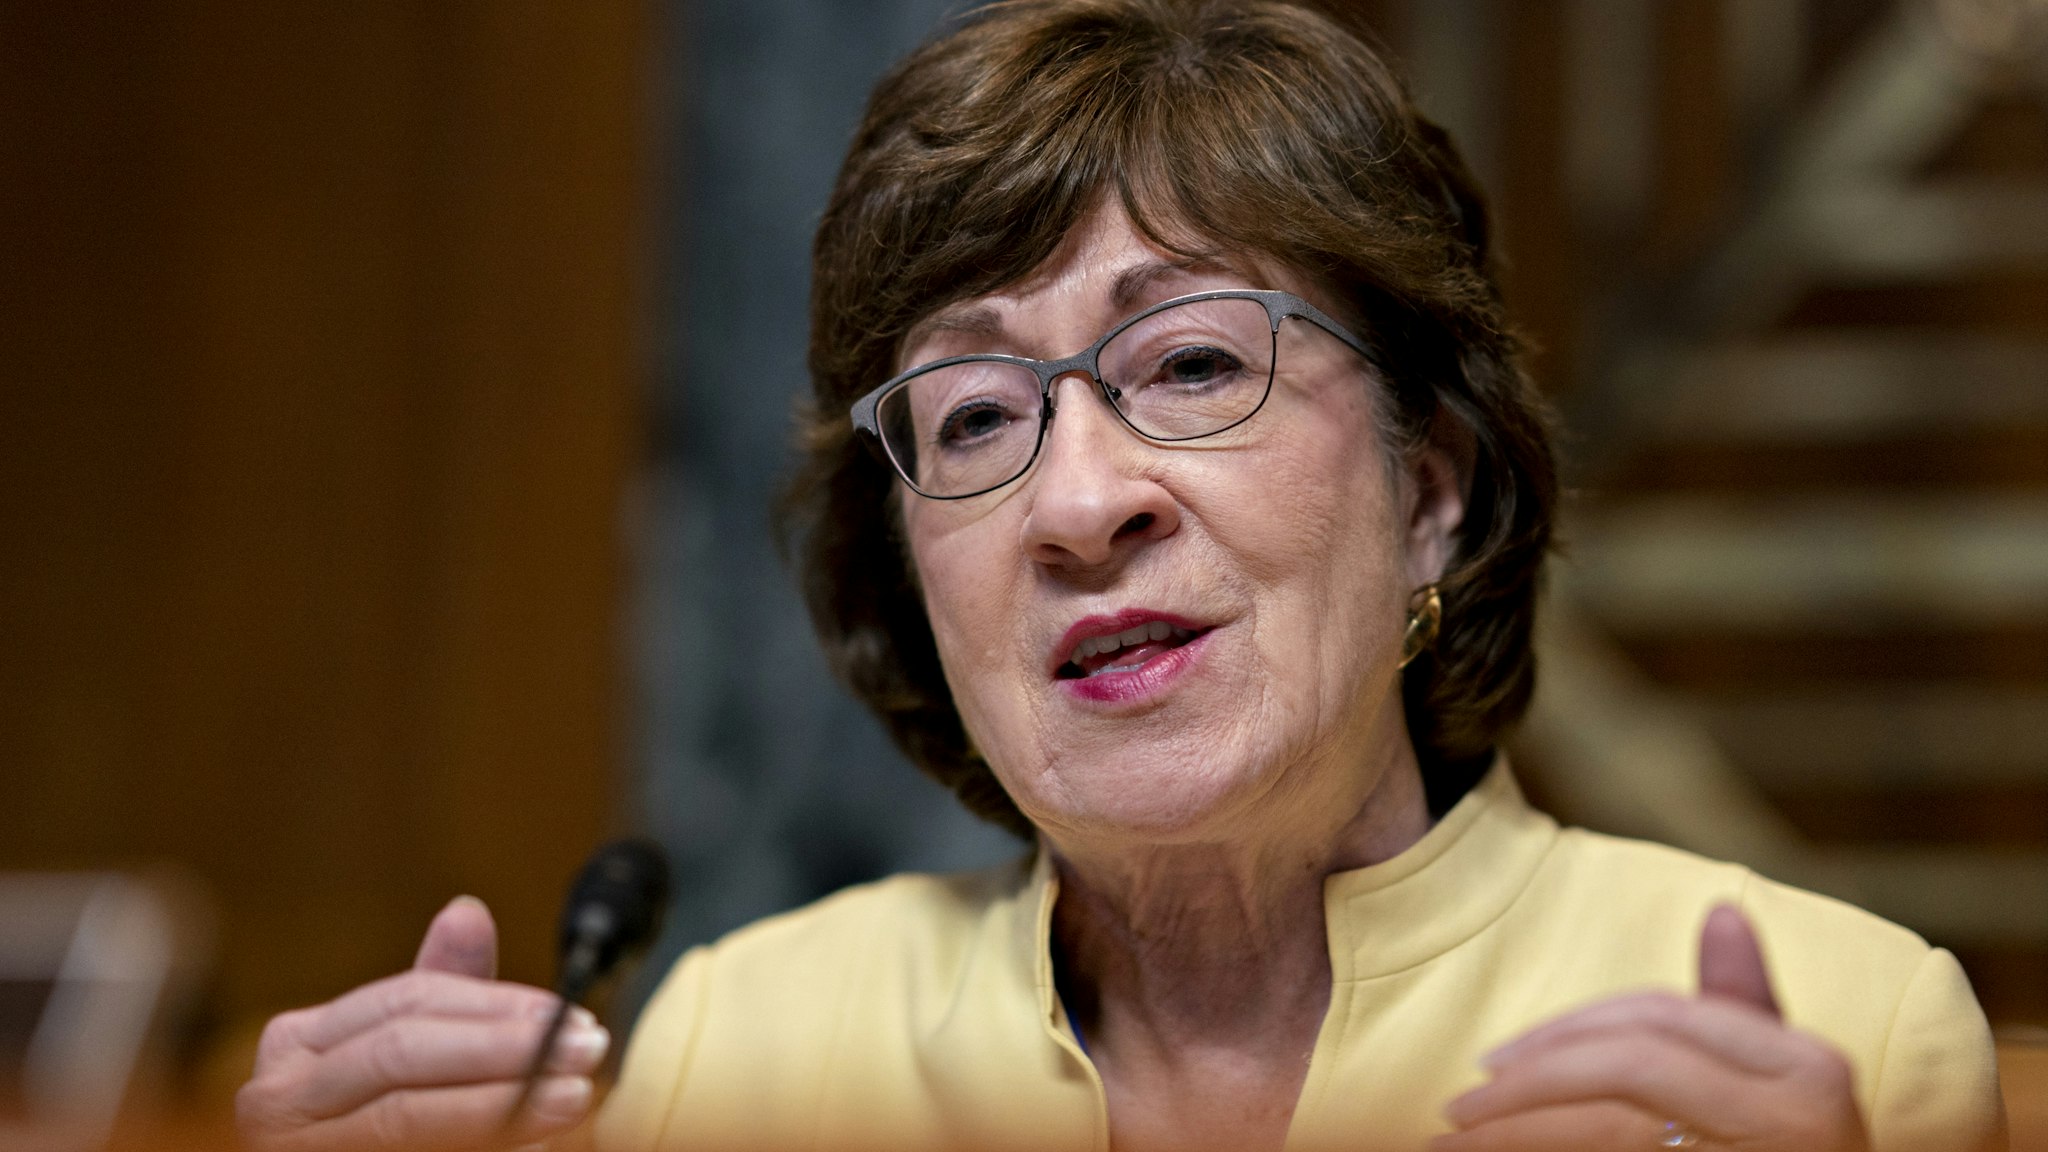 Senator Susan Collins, a Republican from Maine and chairman of the Senate Appropriations Subcommittee on Transportation, questions witnesses during a hearing in Washington, D.C., U.S., on Wednesday, July 31, 2019. U.S. aviation regulators, who have been stung by criticism for approving a flawed design on the Boeing Co. 737 Max that helped lead to two crashes, told lawmakers at the hearing that the scrutiny they're facing will improve safety. Photographer: Andrew Harrer/Bloomberg via Getty Images